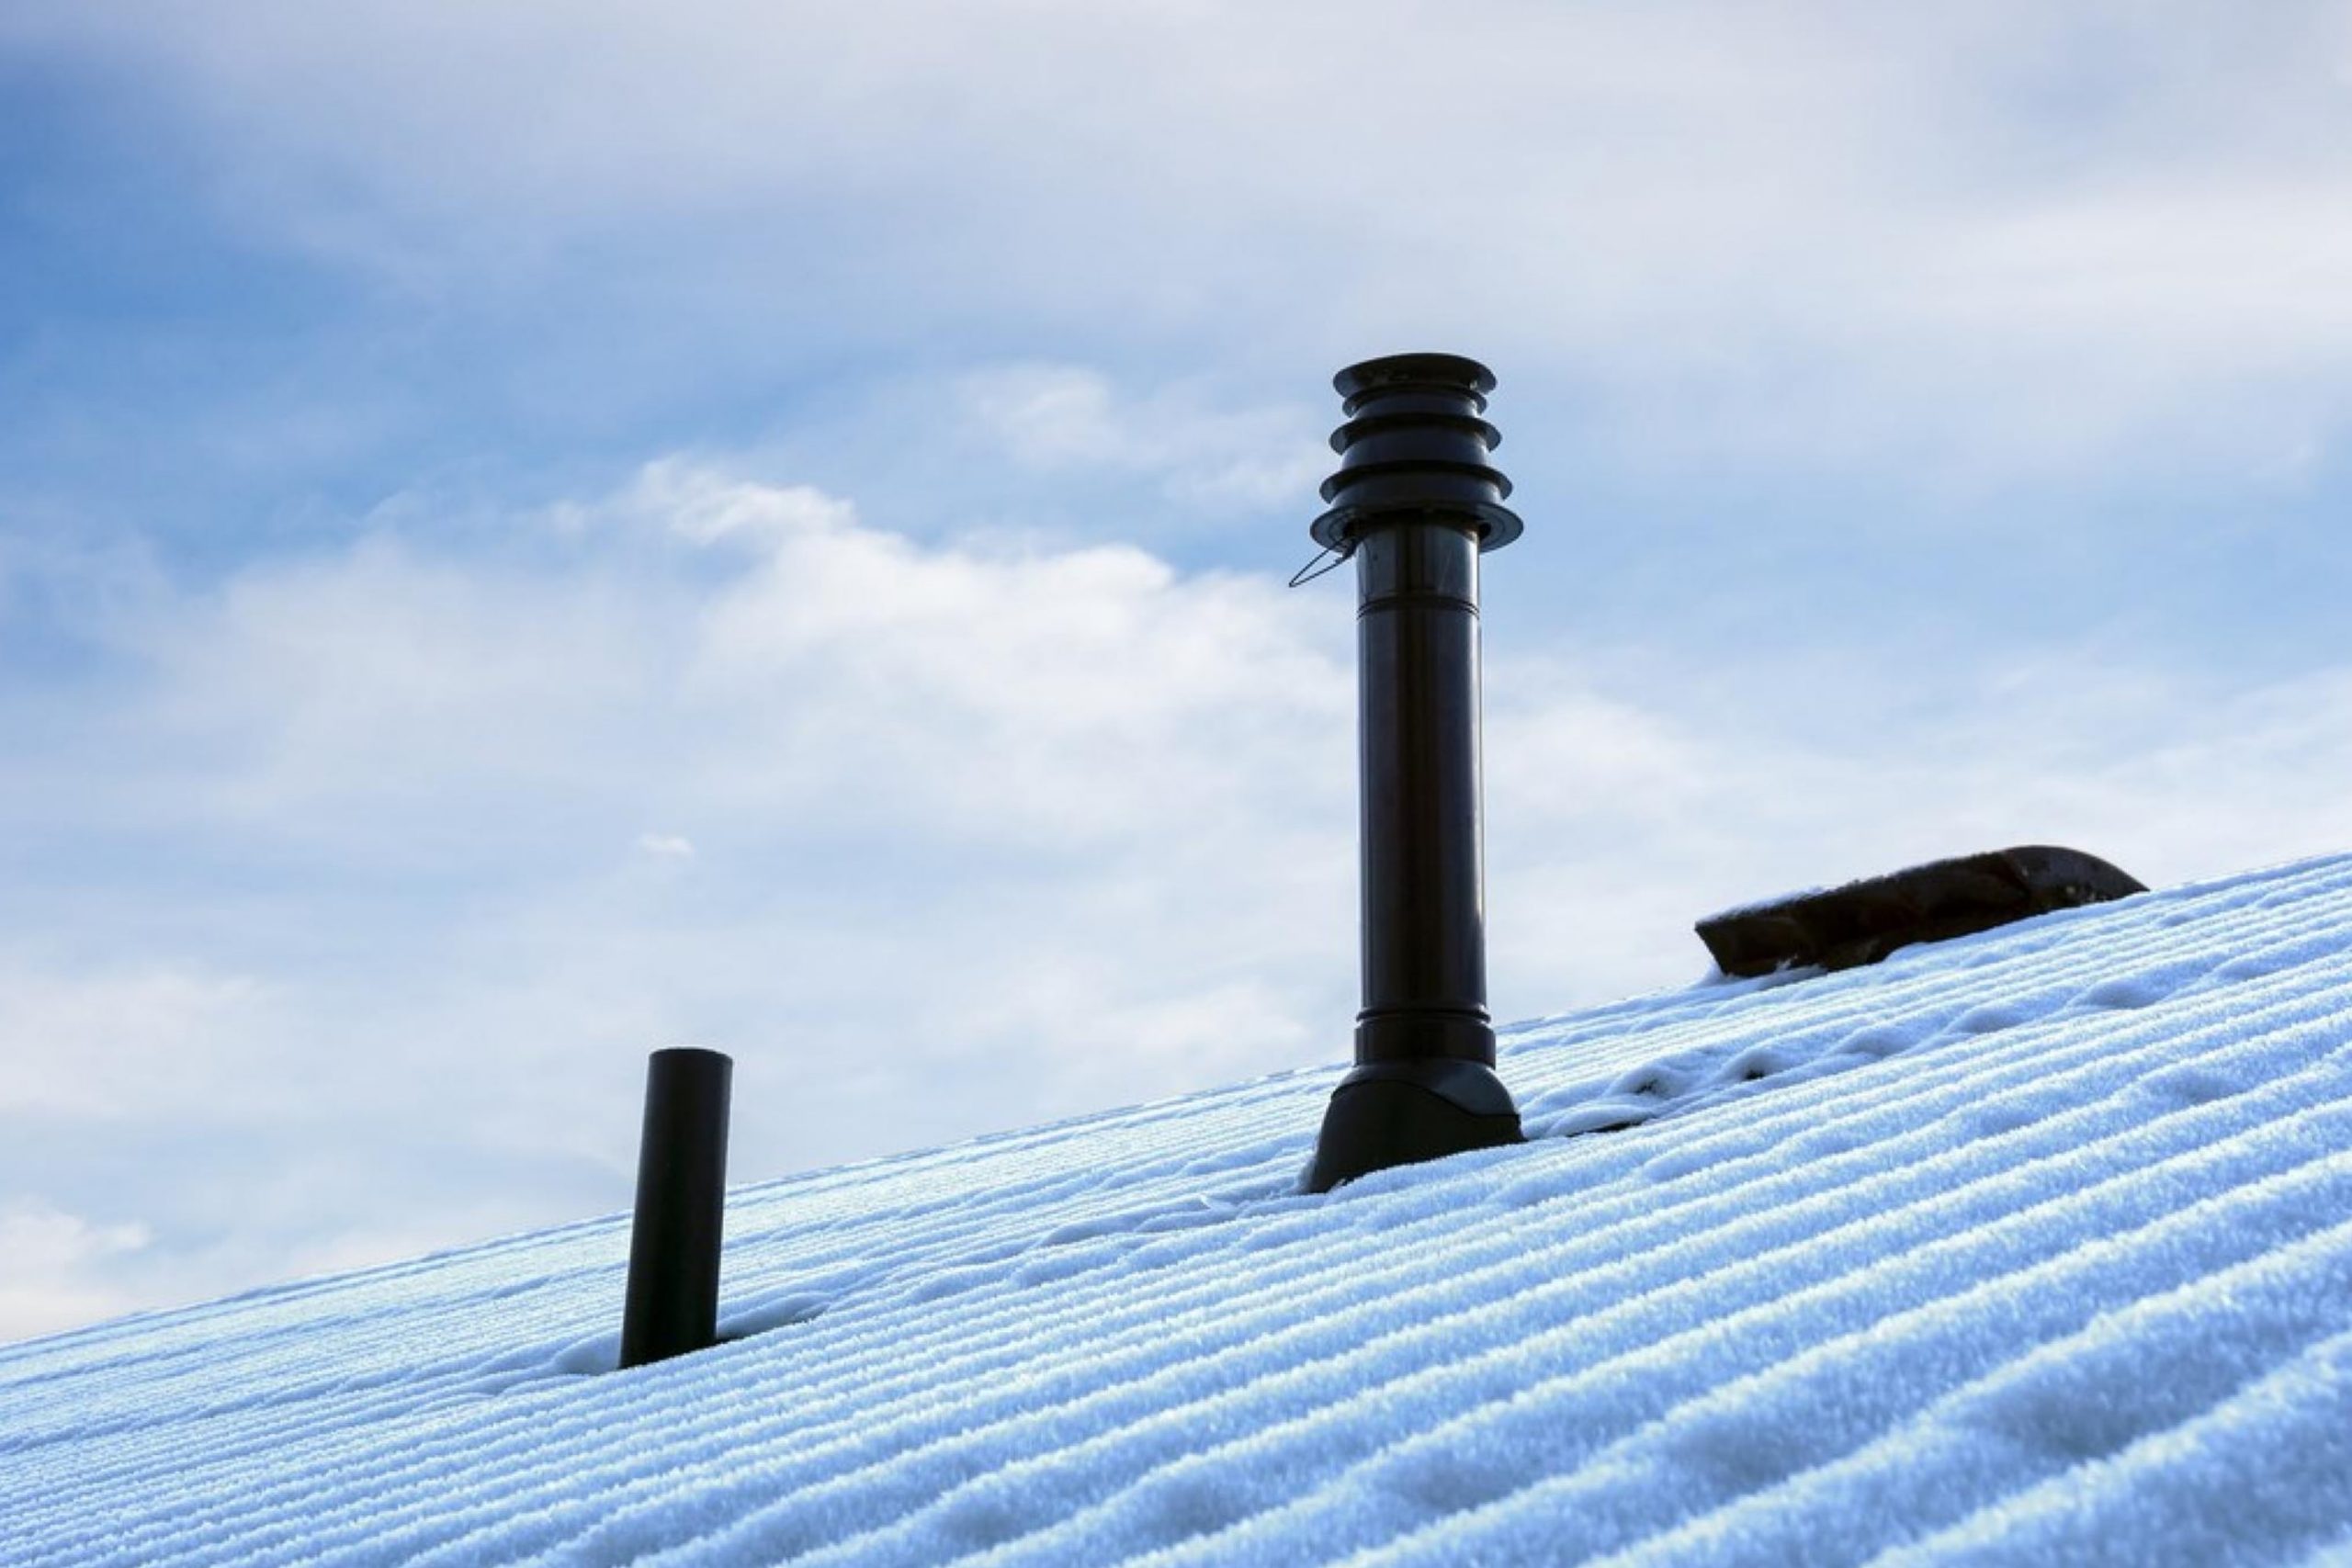 How Much Does It Cost to Operate a Roof Heating Cable